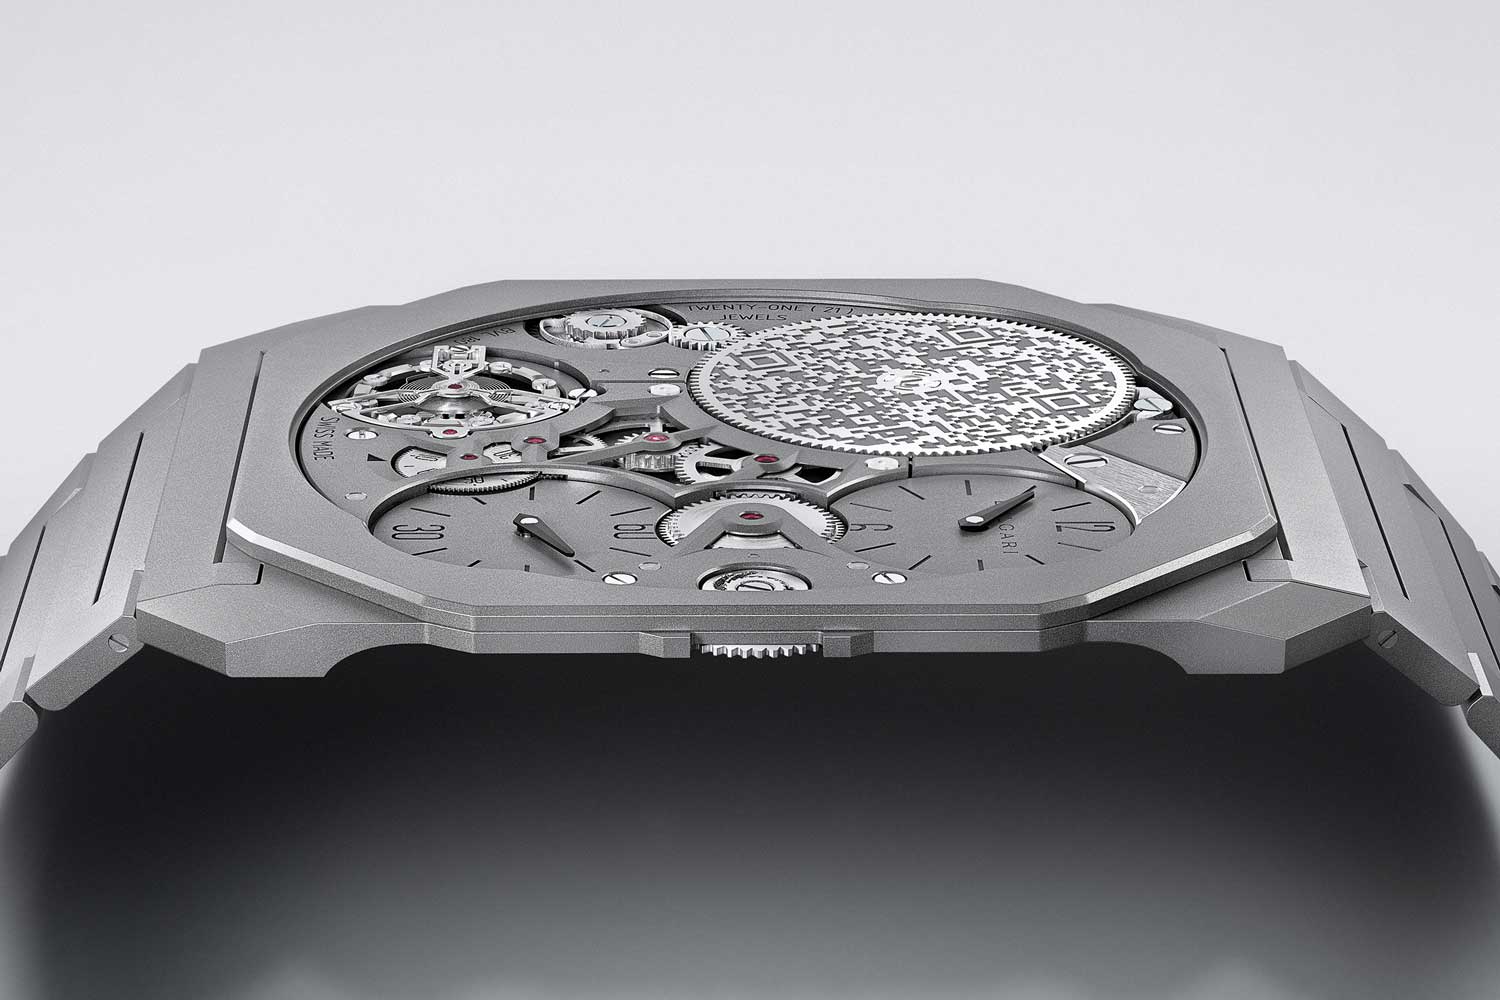 1.8mm thickness means the dial and movement are practically on the same plane